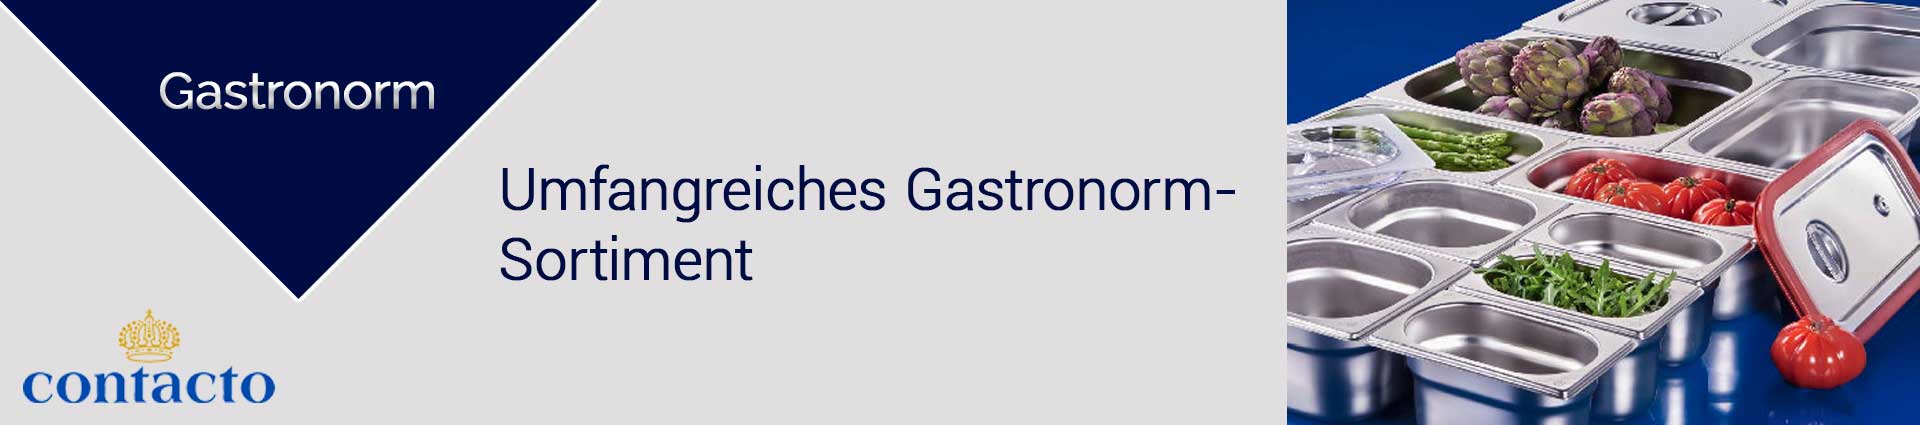 Contacto Gastronorm Banner